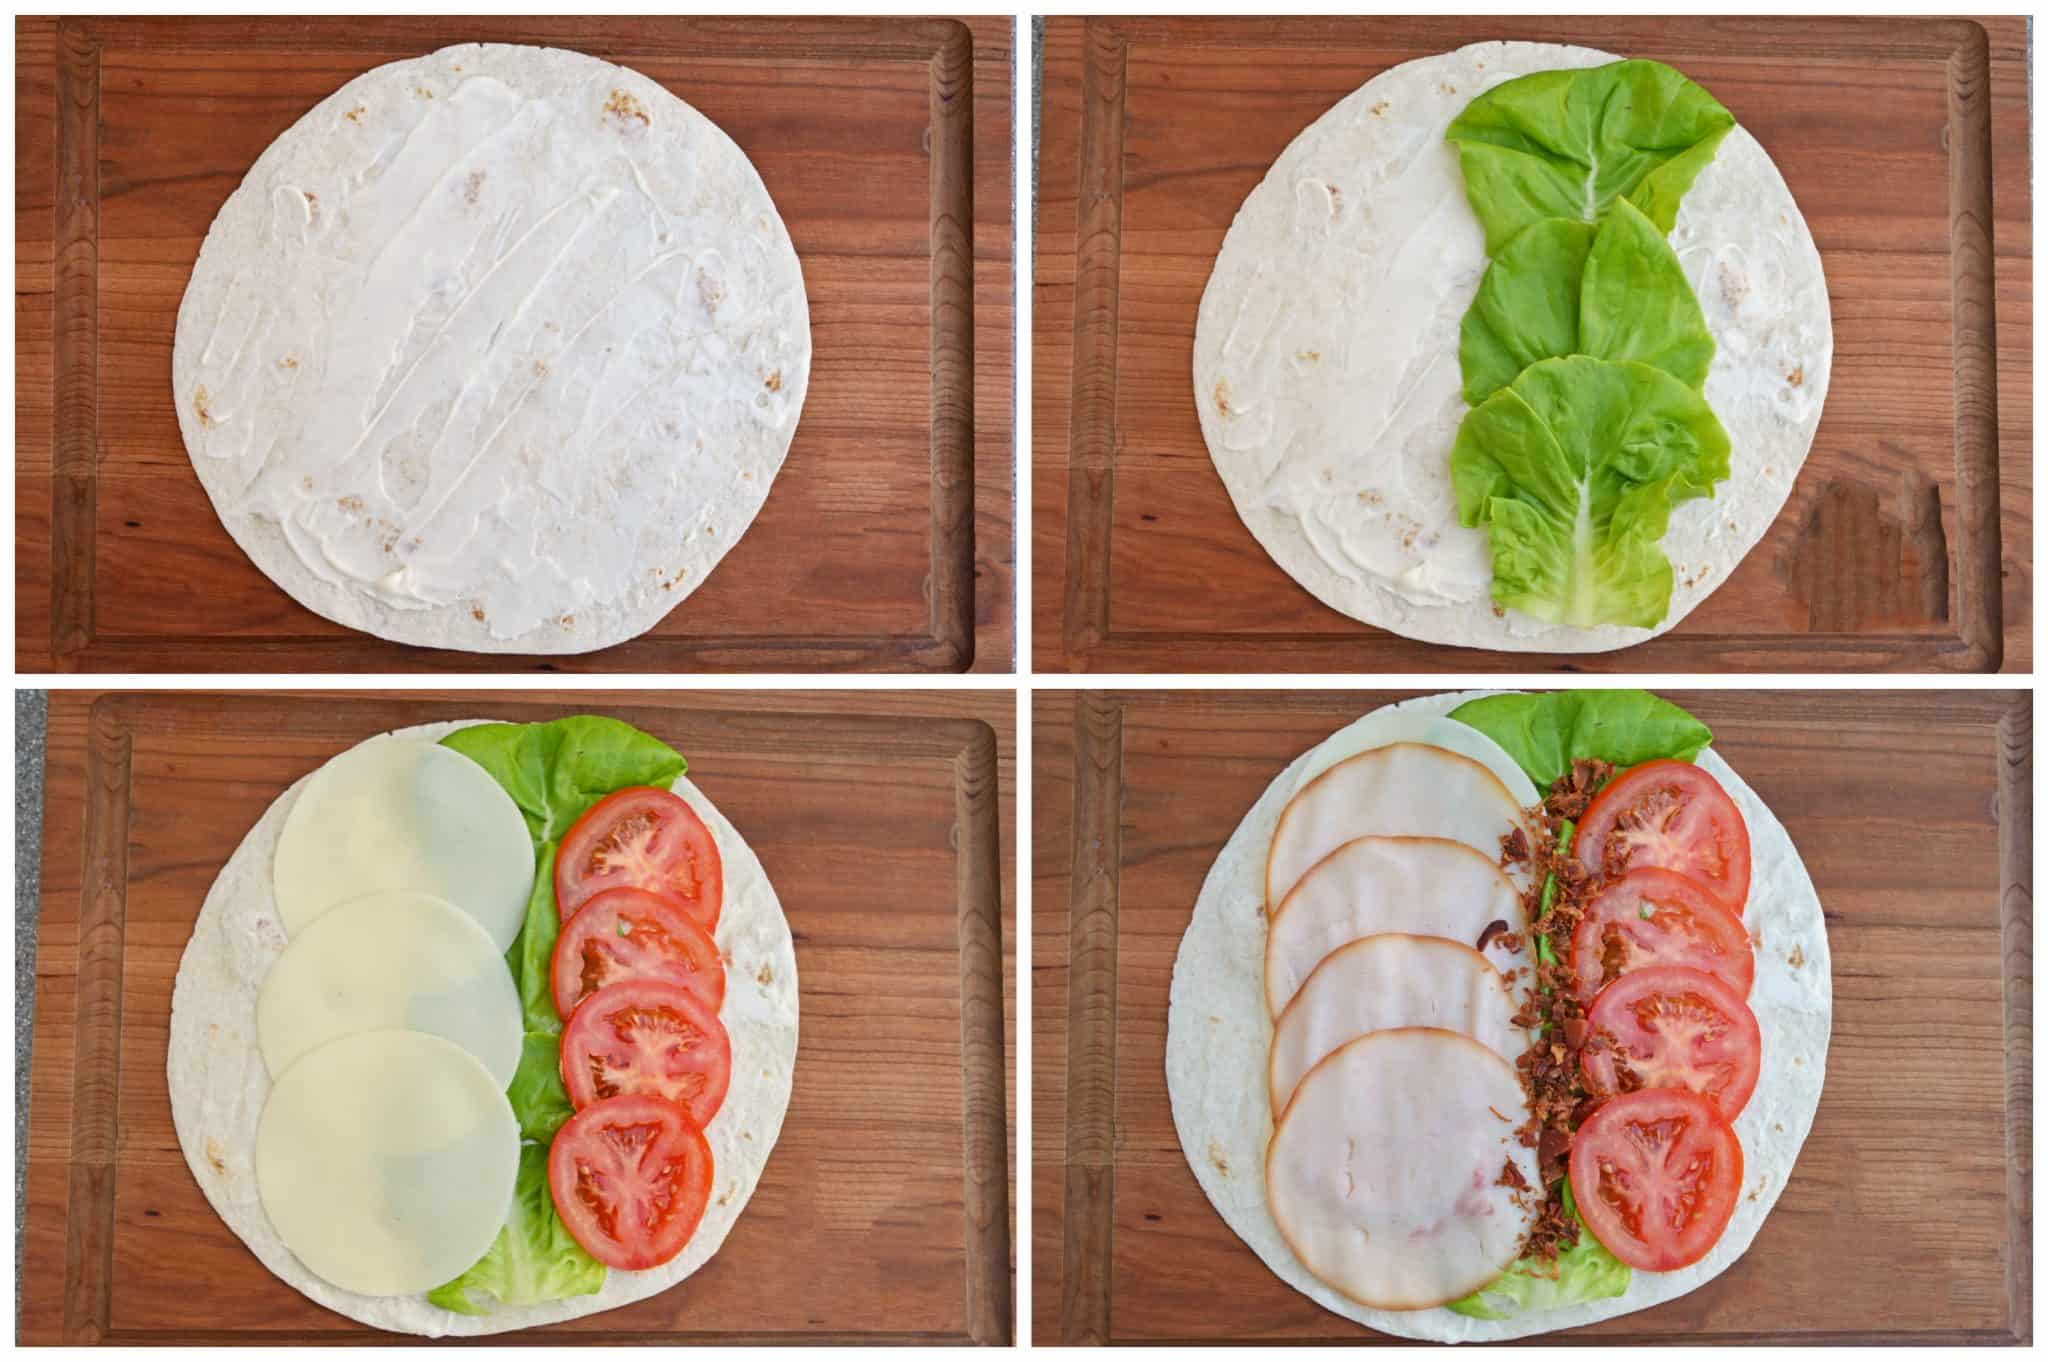 Turkey Club Sandwich Pinwheels use the traditional club sandwich ingredients, but wrap them in a tortilla. Easy to make, eat and clean up! #clubsandwichrecipe #turkeyclub #howtomakepinwheels www.savoryexperiments.com